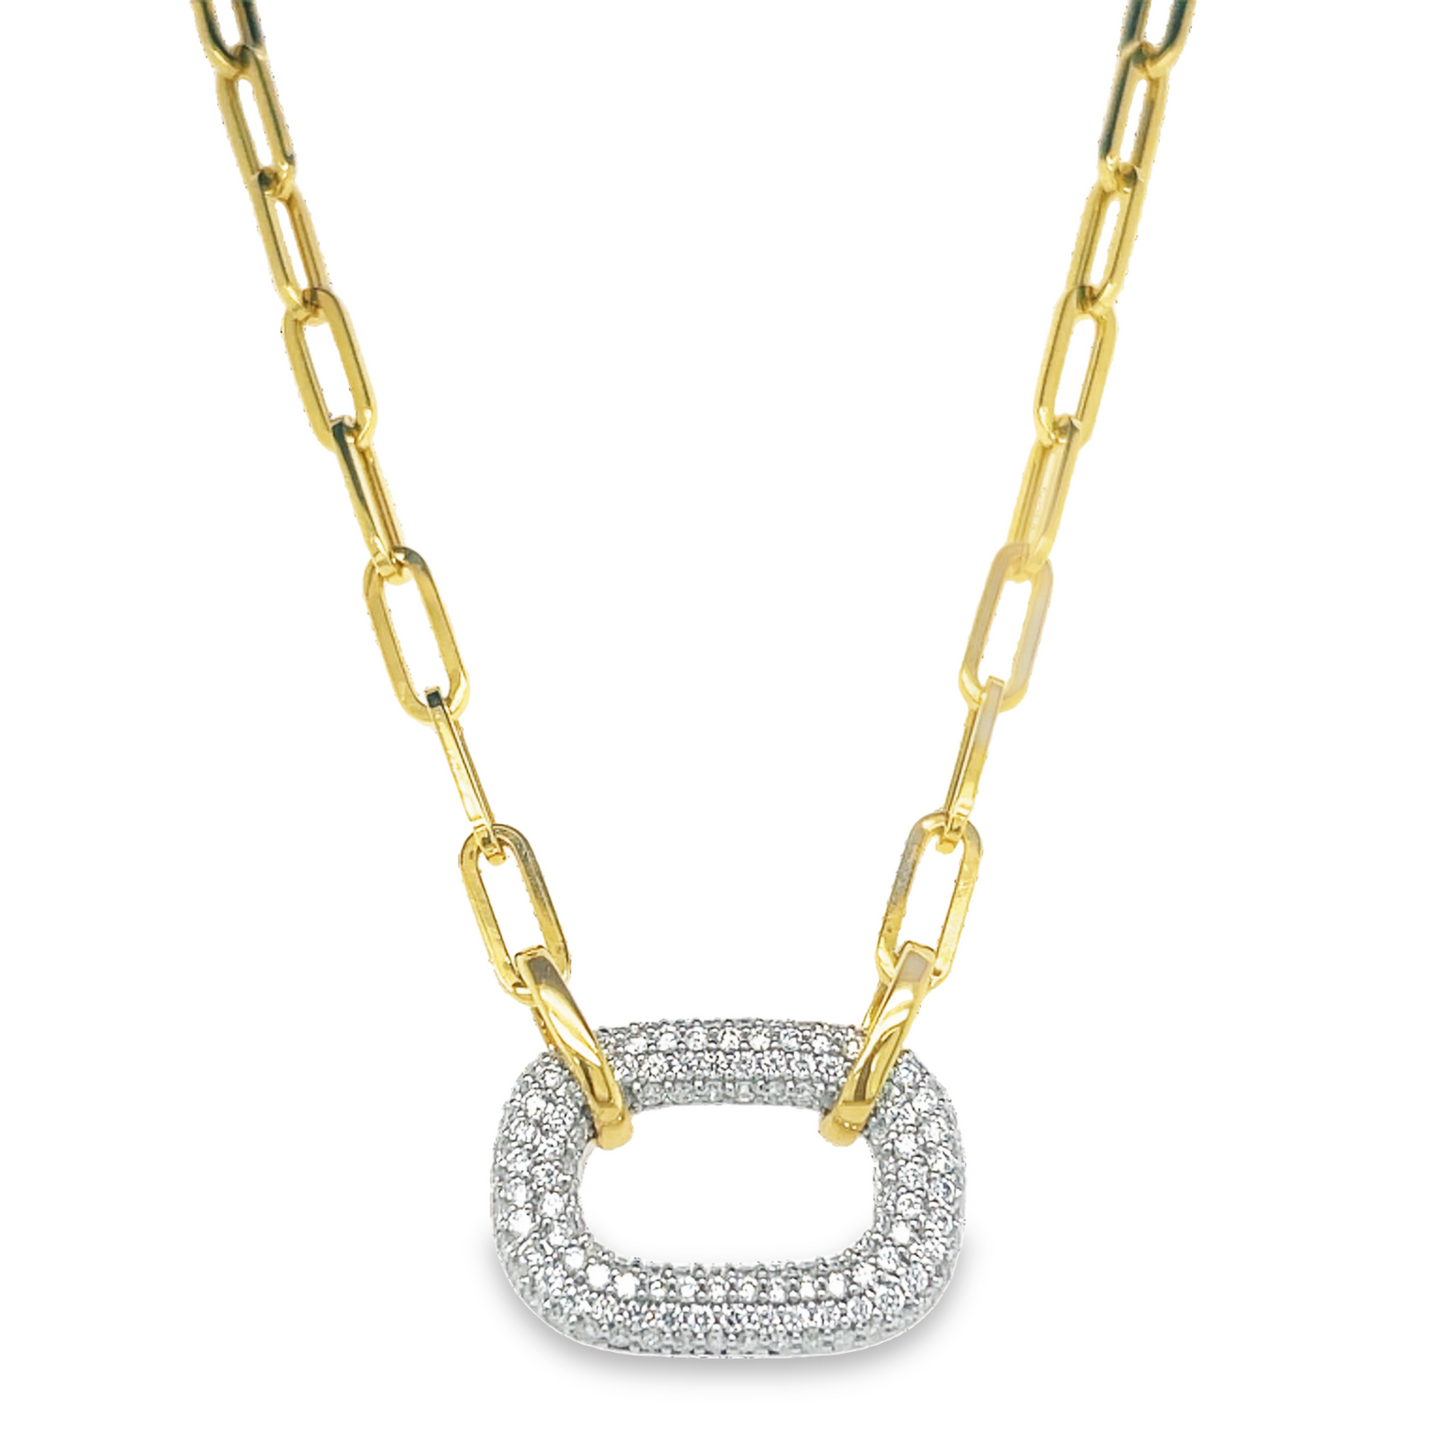 Two Toned Pave Diamond Necklace